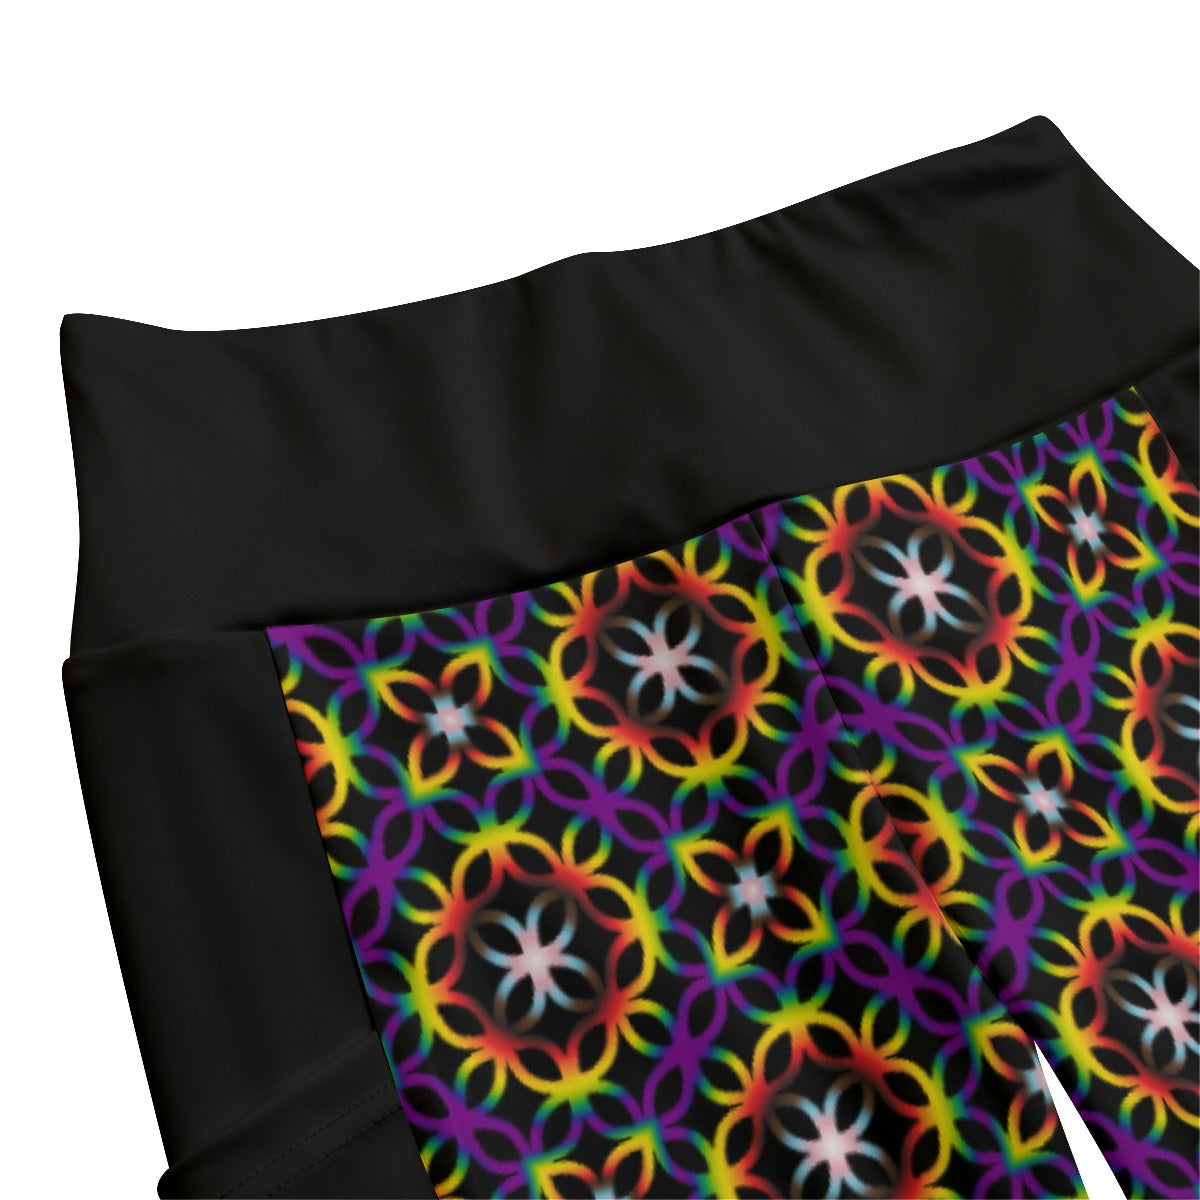 Circle Trellis Patterned High Waist Leggings With Side Pockets | Choose Your Colourway